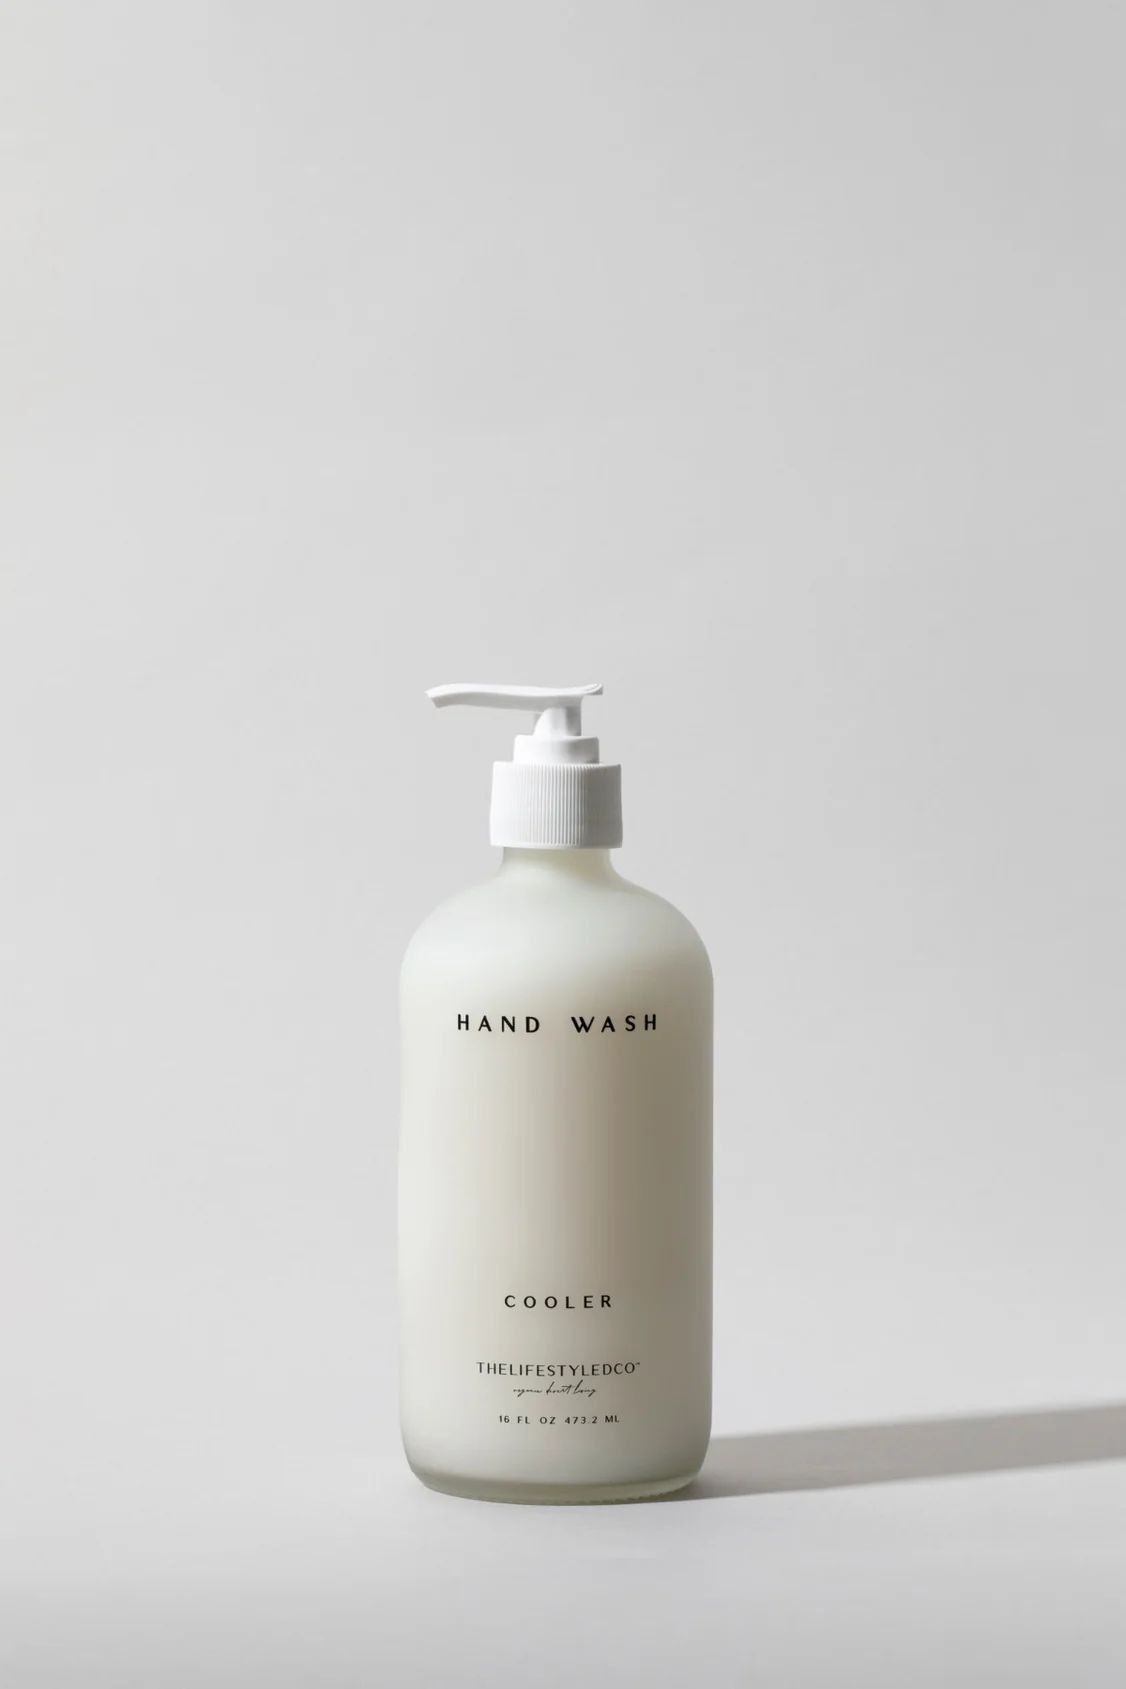 LCO Exclusive  - Cooler Hand Wash - 16 oz | THELIFESTYLEDCO